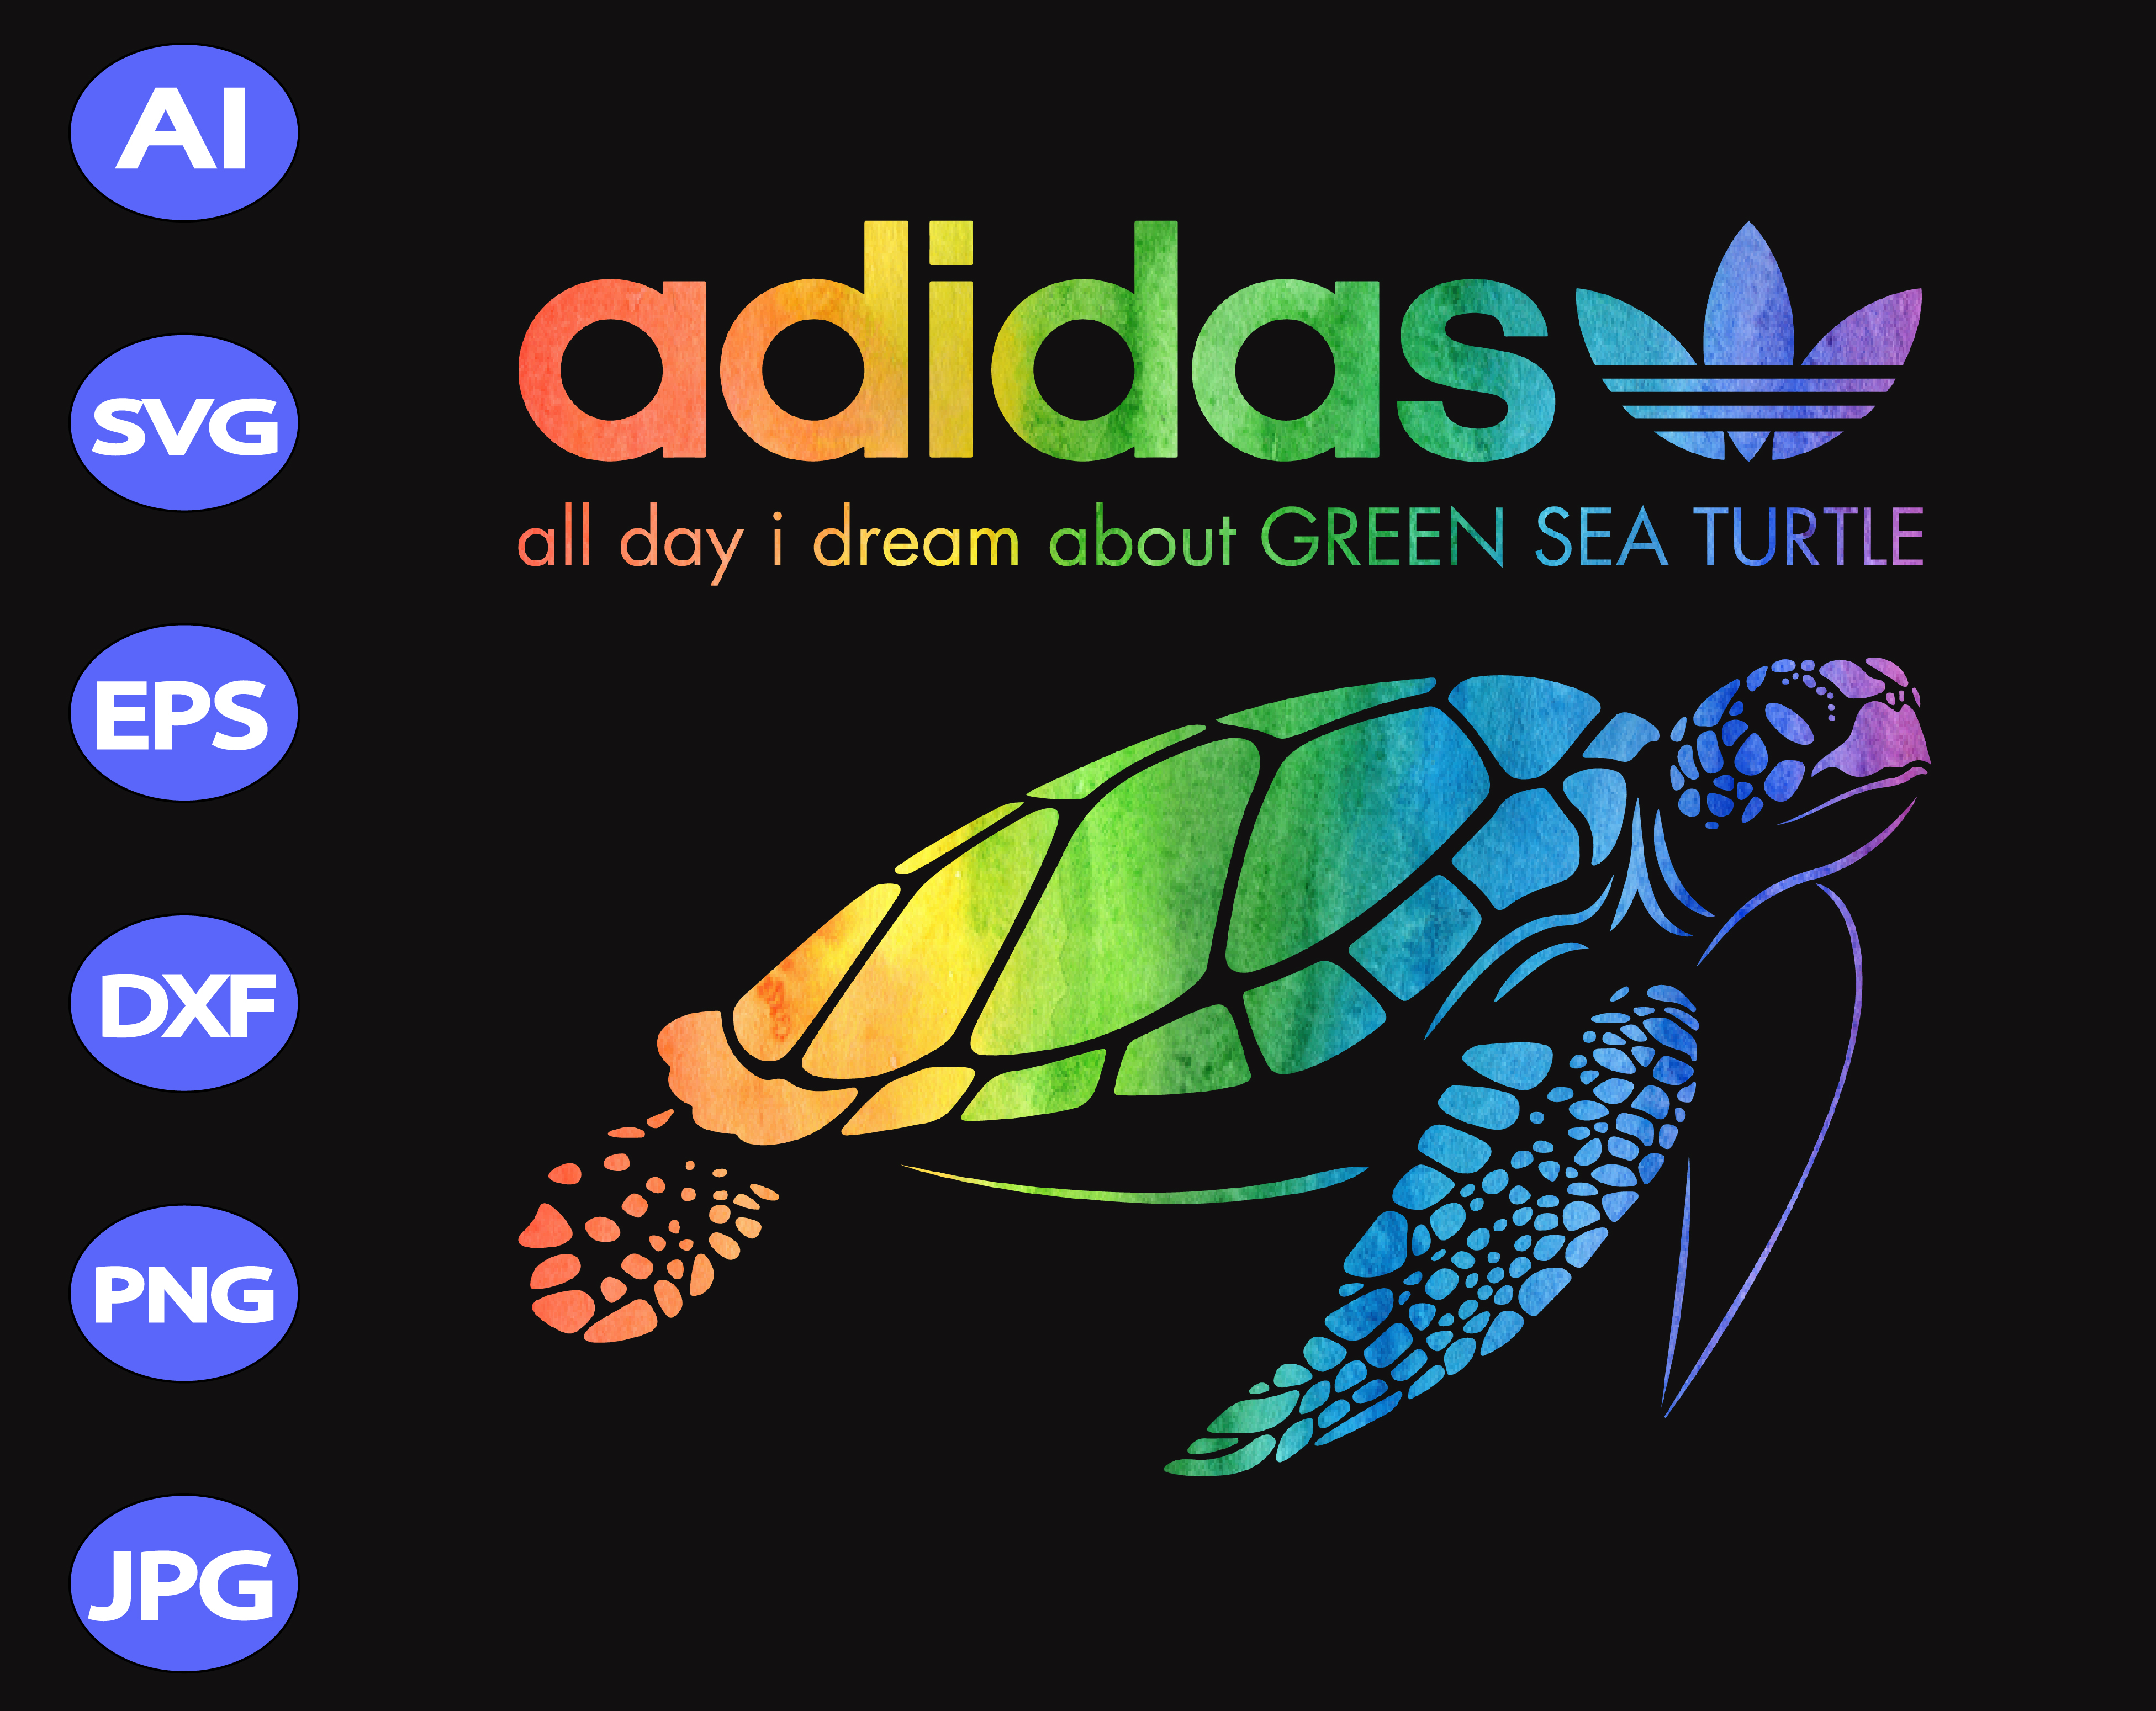 Download Adidas All Day I Dream About Green Sea Turtle Svg Dxf Eps Png Digital Download Designbtf Com